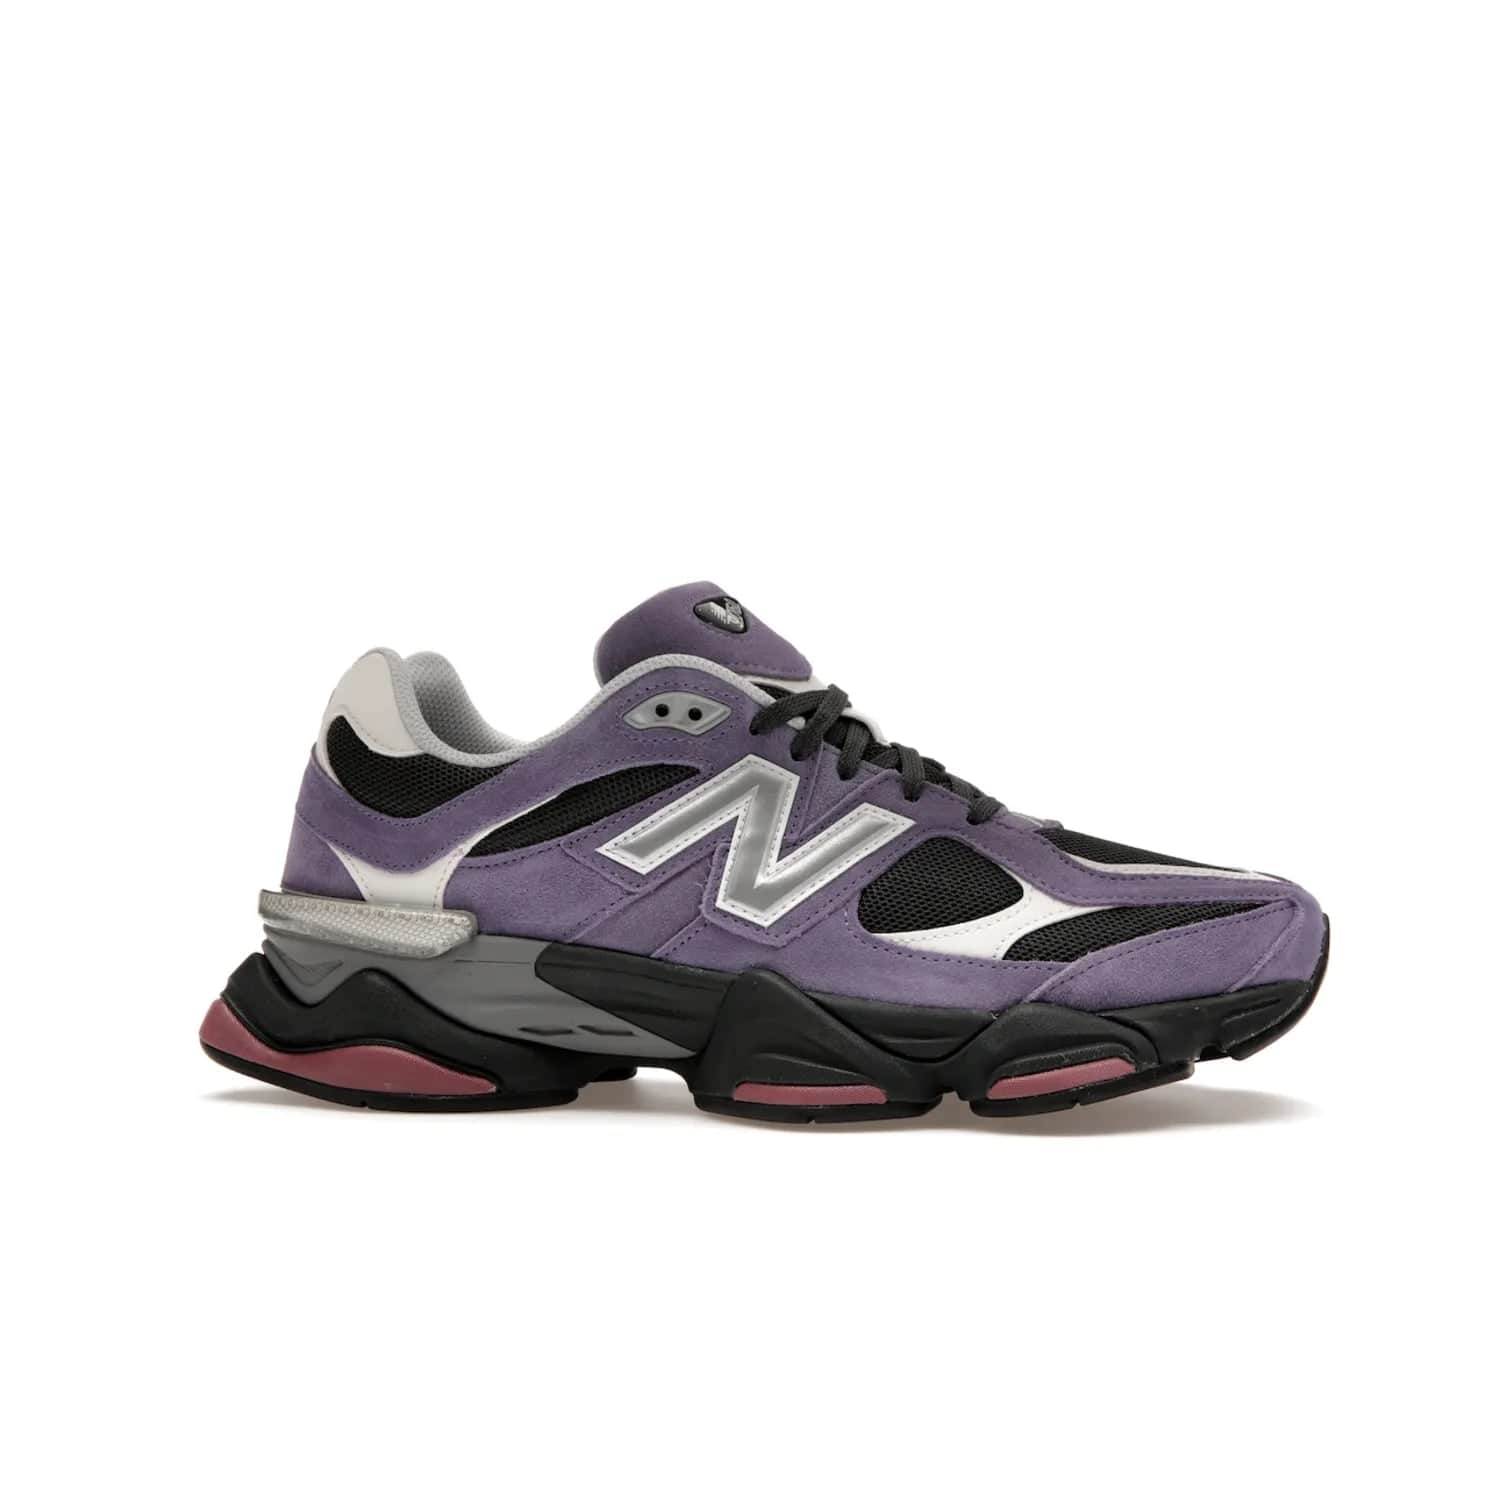 New Balance 9060 Violet Noir - Image 2 - Only at www.BallersClubKickz.com - Experience urban exploration in stylish comfort with the New Balance 9060 Violet Noir. Crafted with an exquisite blend of colors, this pair is perfect for an adventurous city stroll or casual hangouts. Enjoy all-day comfort and make a statement with the New Balance 9060 Violet Noir.